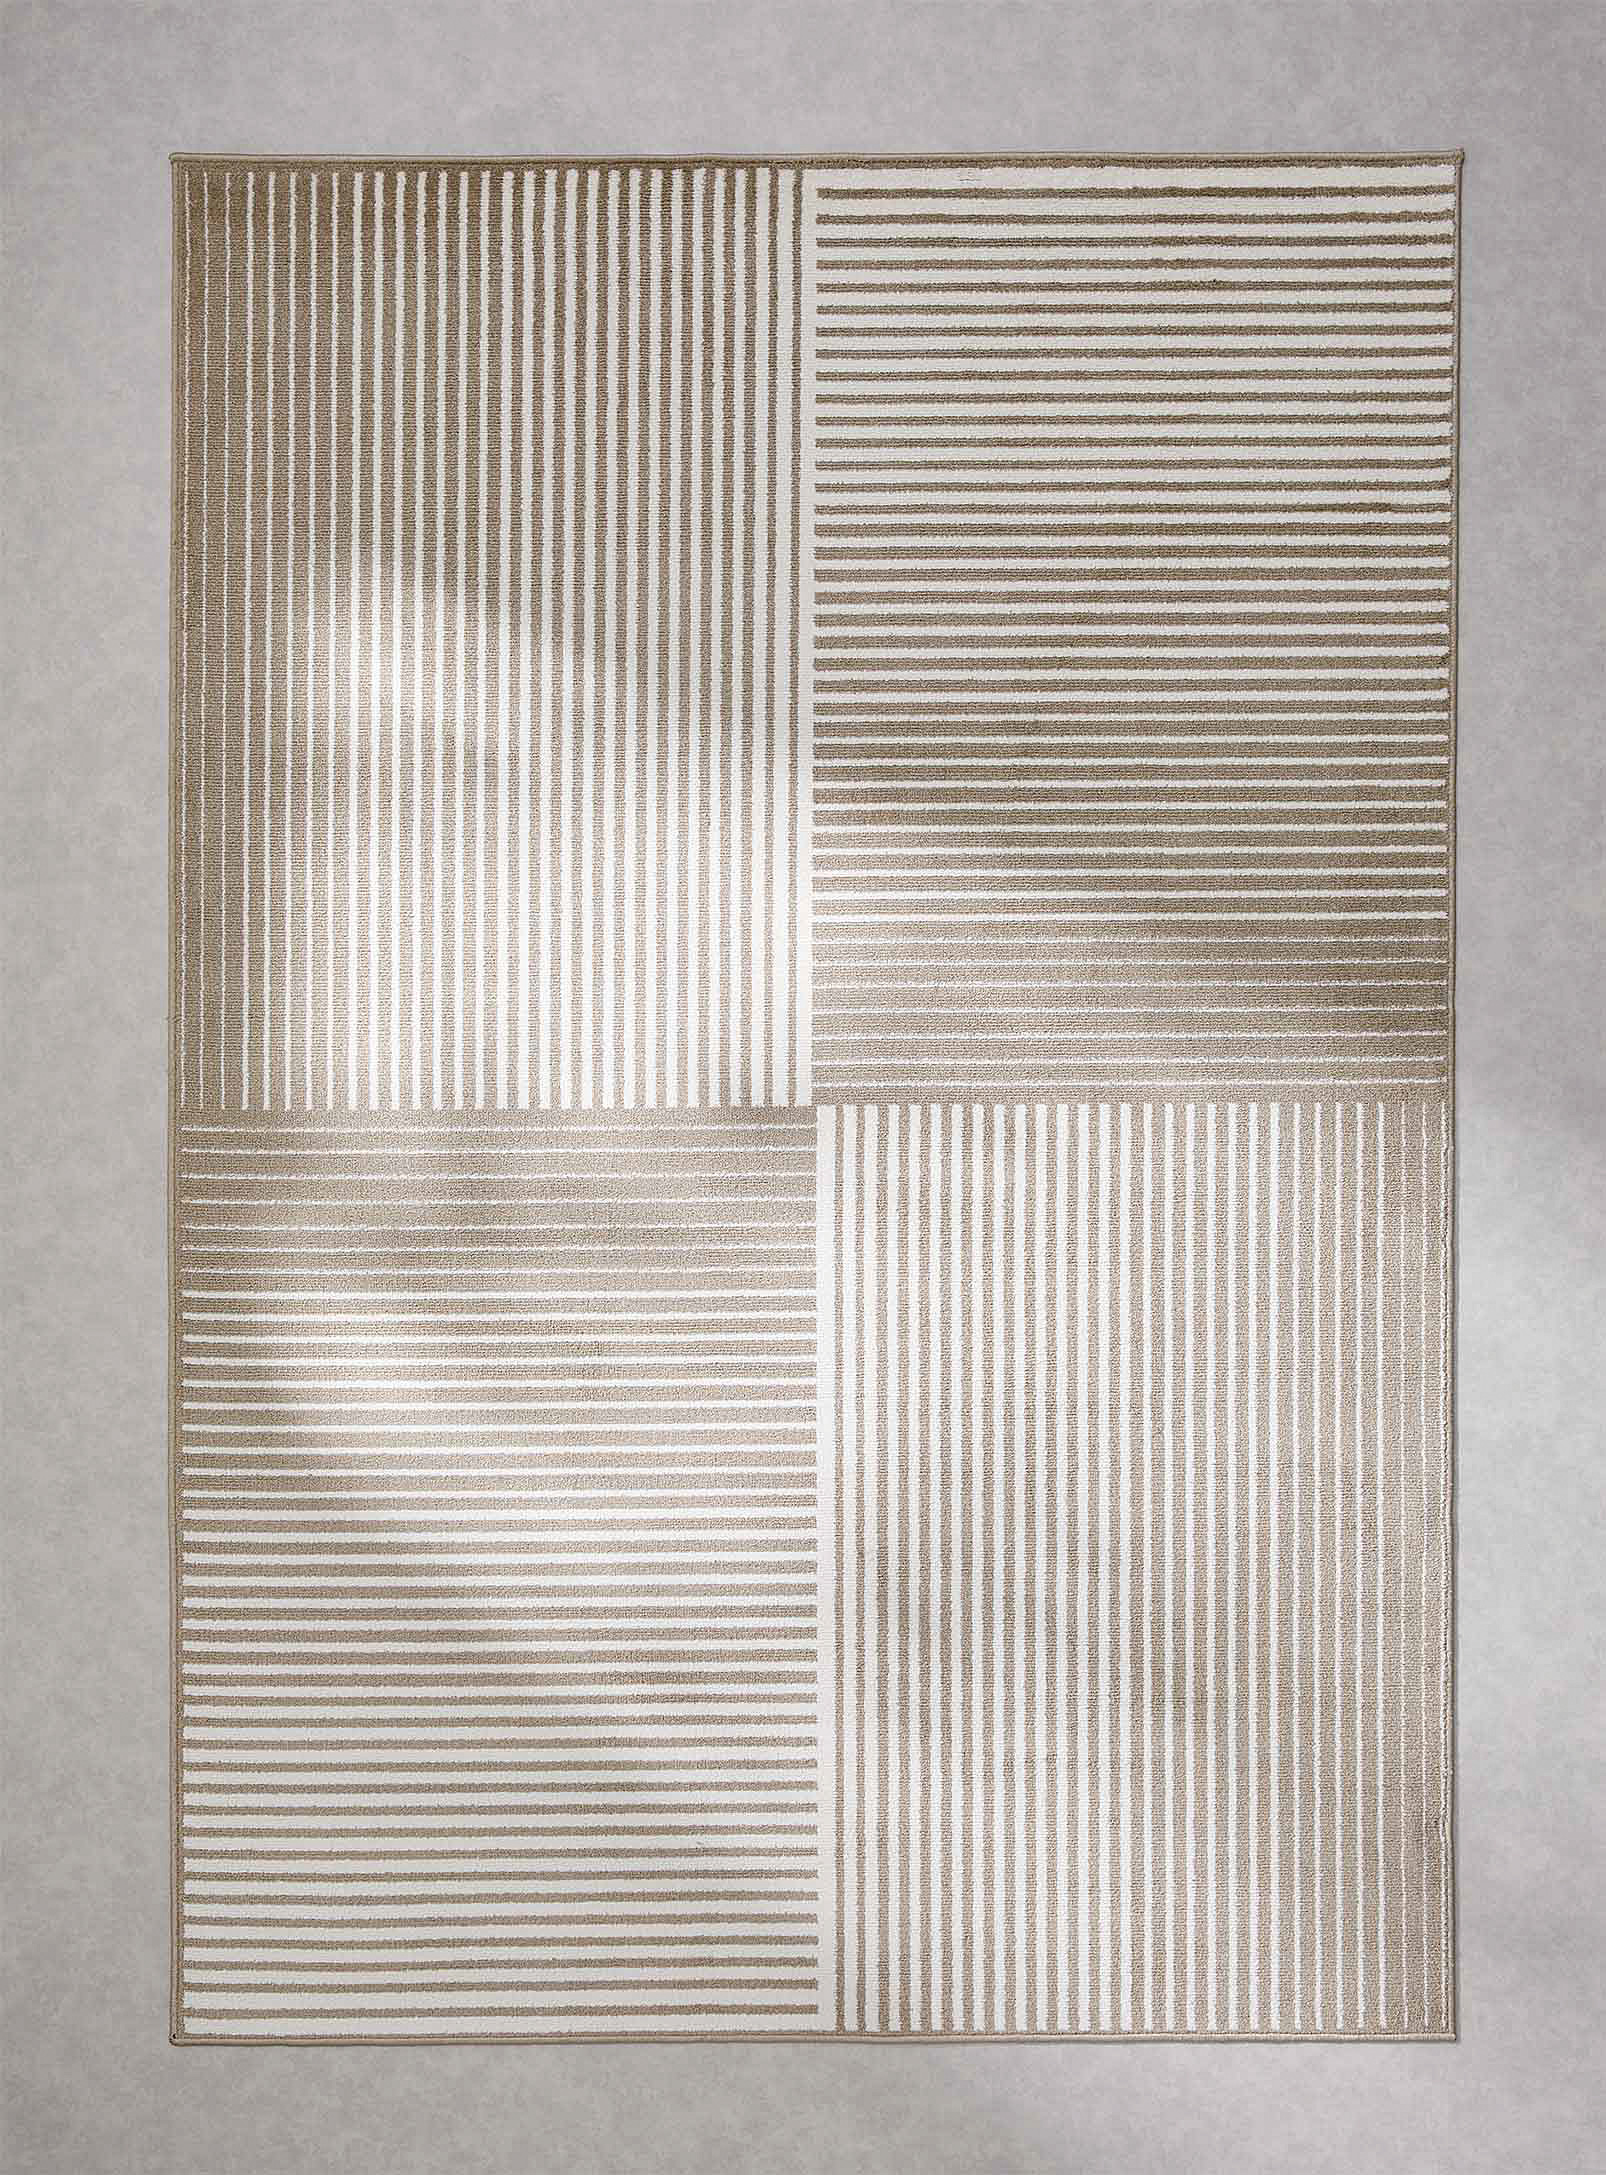 Simons Maison Bidirectional Stripes Rug See Available Sizes In Ivory/cream Beige